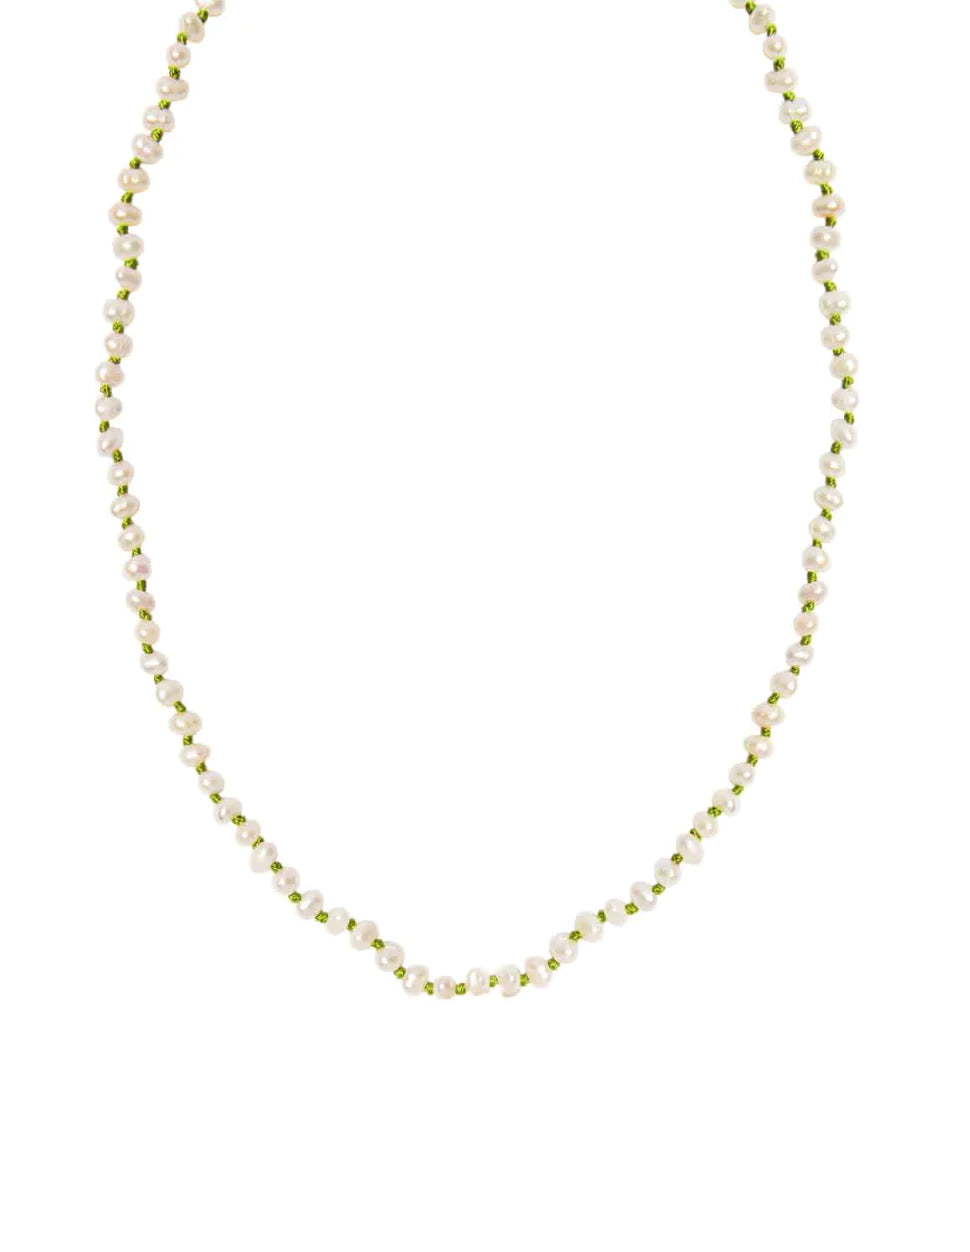 WIZARD OF PEARLS NECKLACE OLIVE